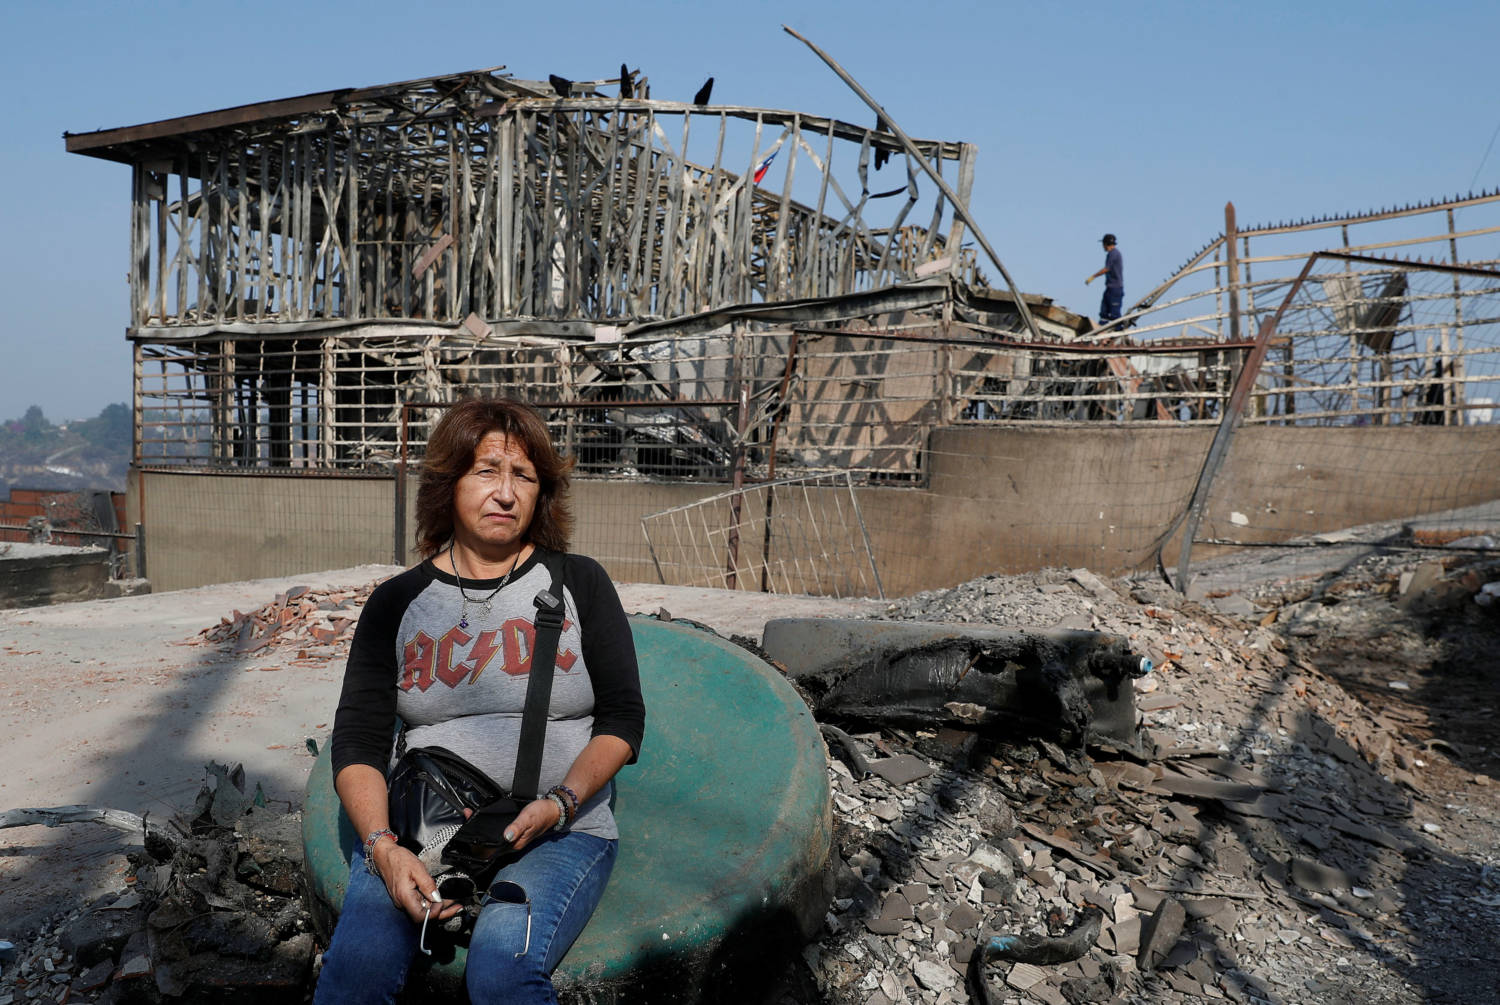 Ingrid Crespo Poses For A Picture Next To Remains Of Their Burned House, Following The Spread Of Wildfires In Vina Del Mar, Chile